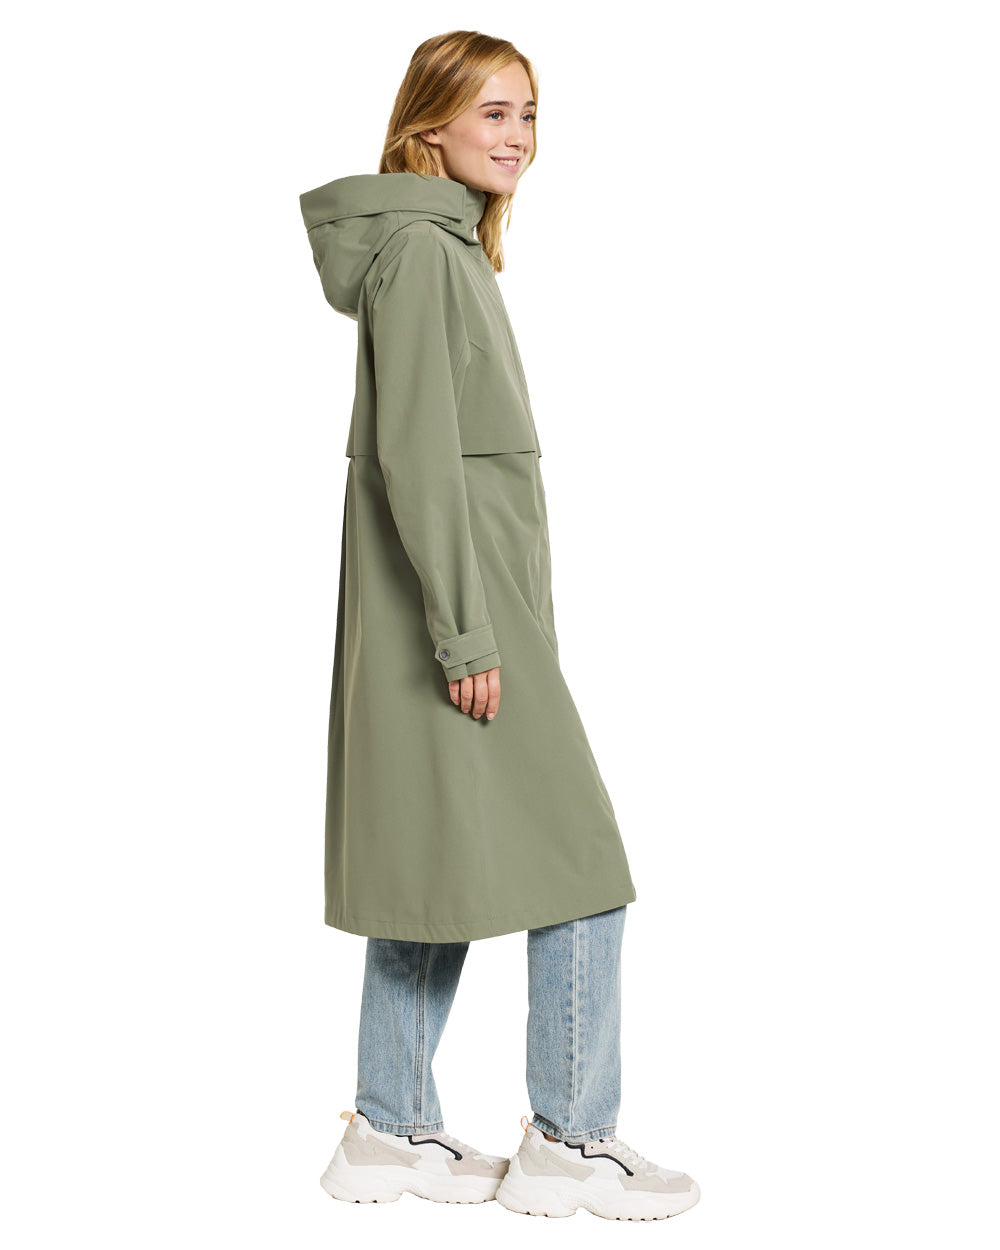 Dusty Olive coloured Didriksons Womens Parka on White background 